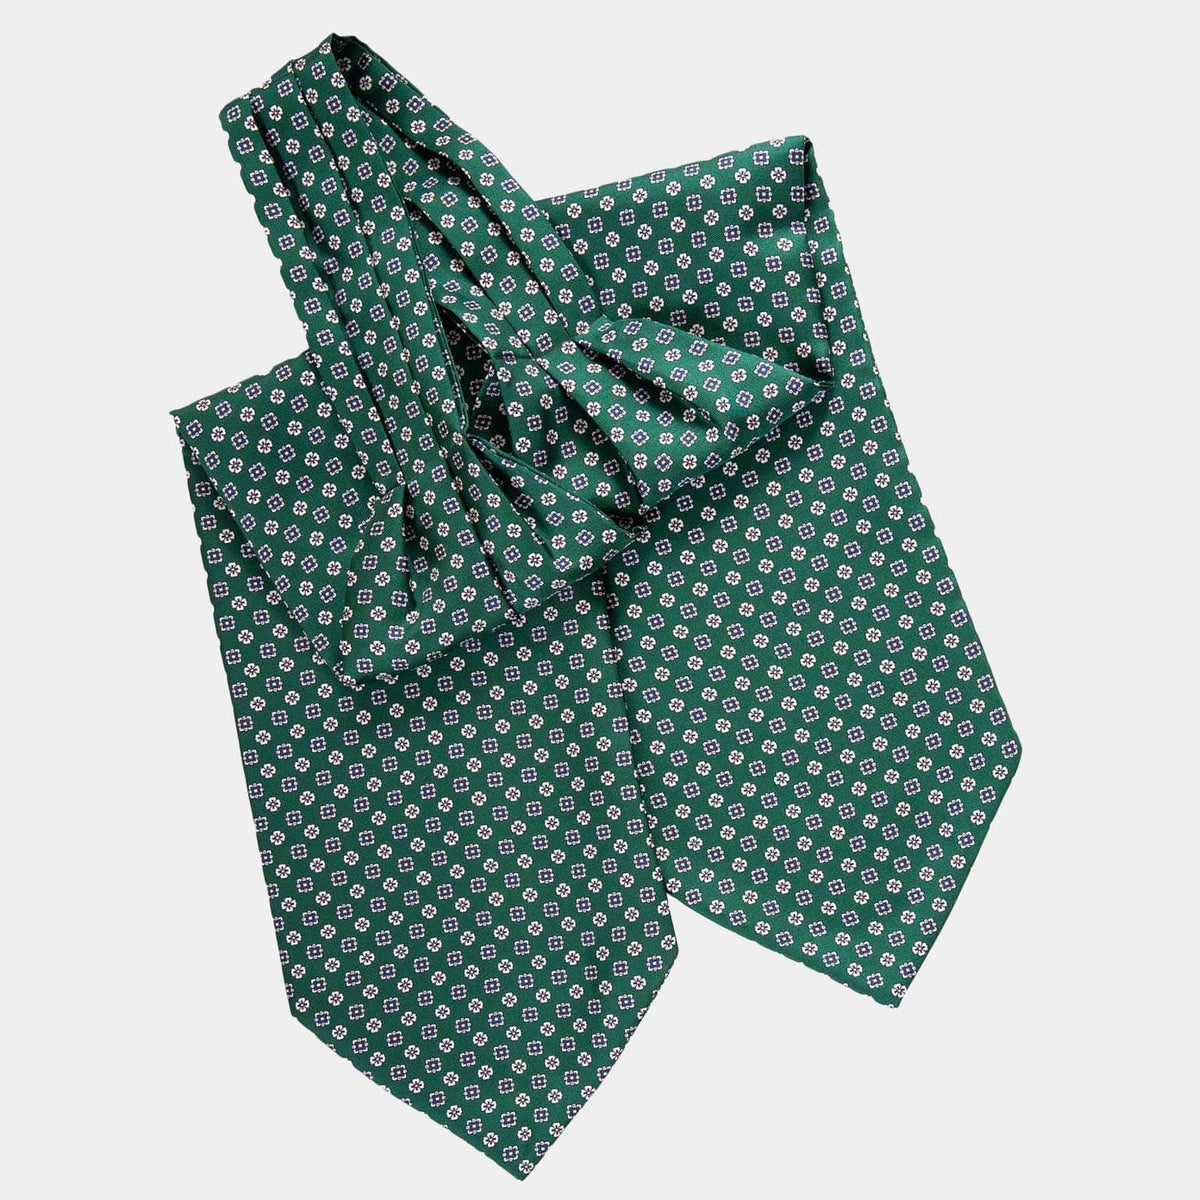 Green and Navy Ascot Cravat Tie - Made in Italy